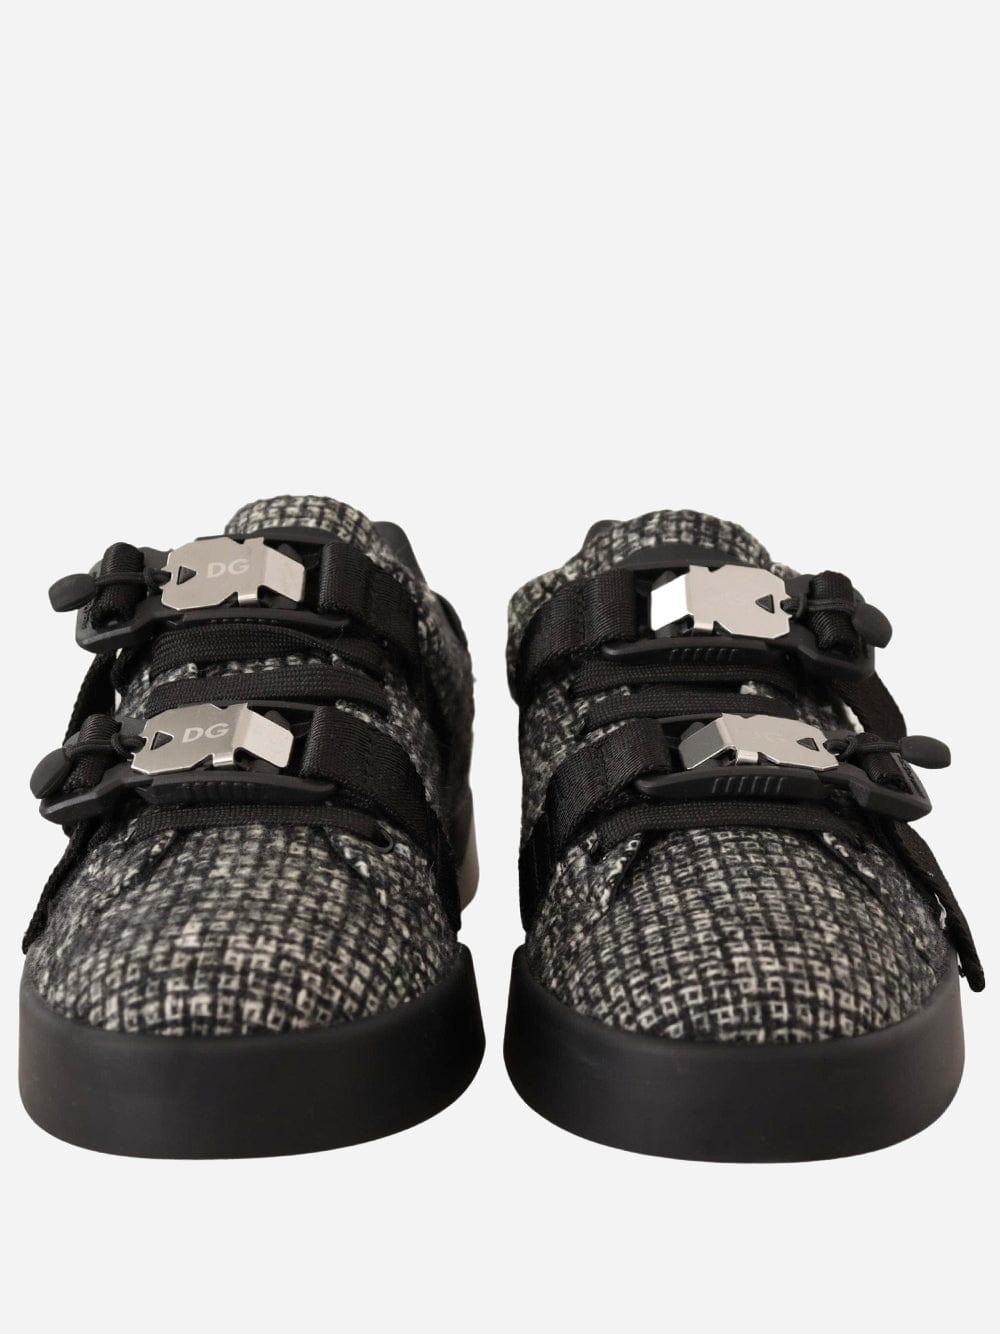 Dolce & Gabbana Logo Strapped Plaid Sneakers